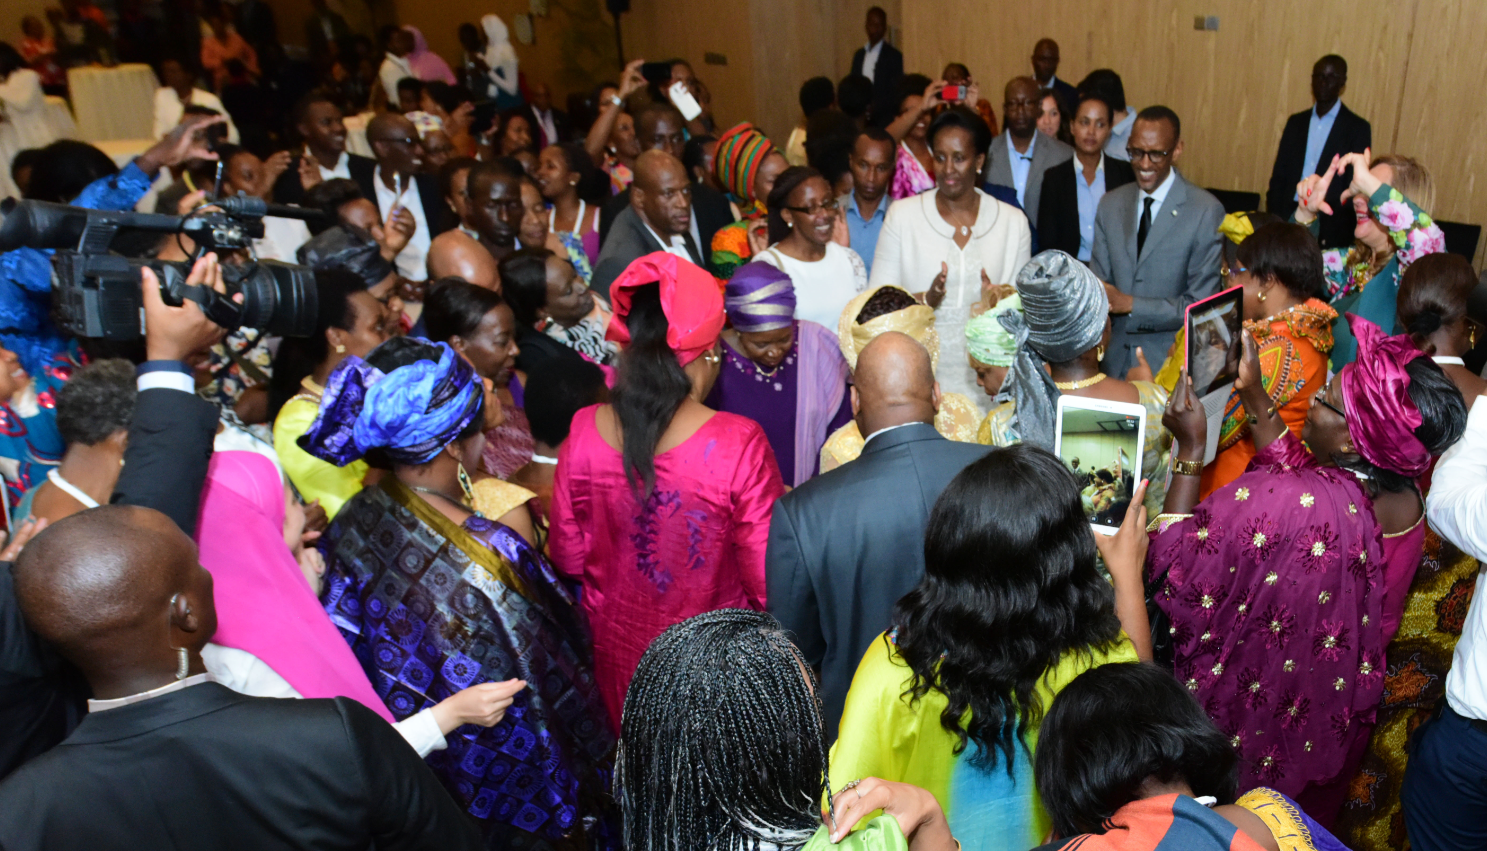 The event was attended by dozens of guests at Marriott Hotel, Kigali